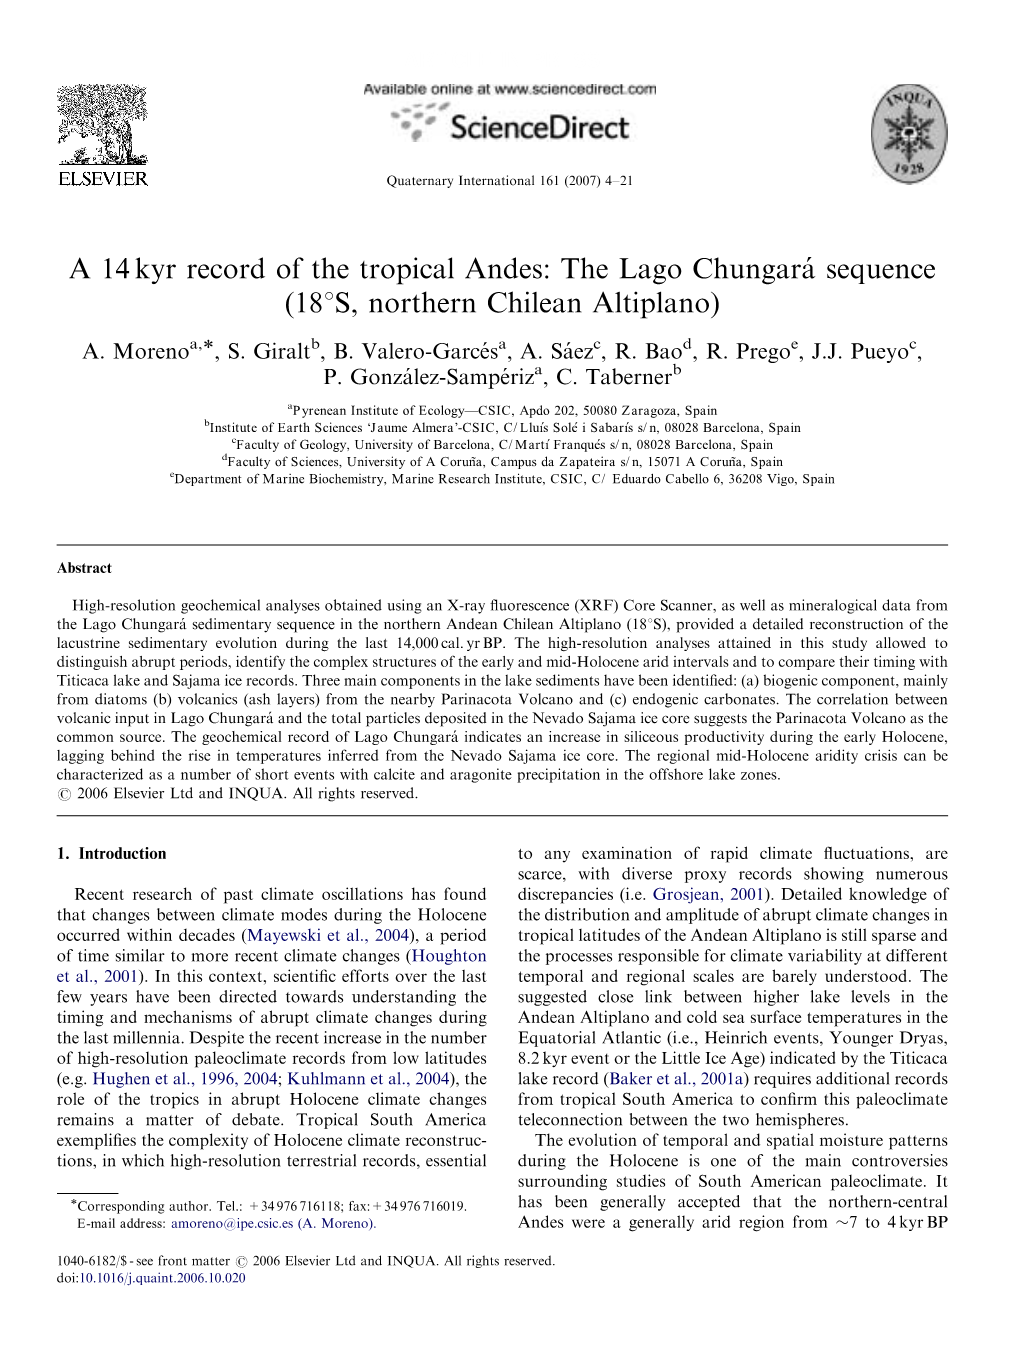 A 14Kyr Record of the Tropical Andes: the Lago Chungara´ Sequence